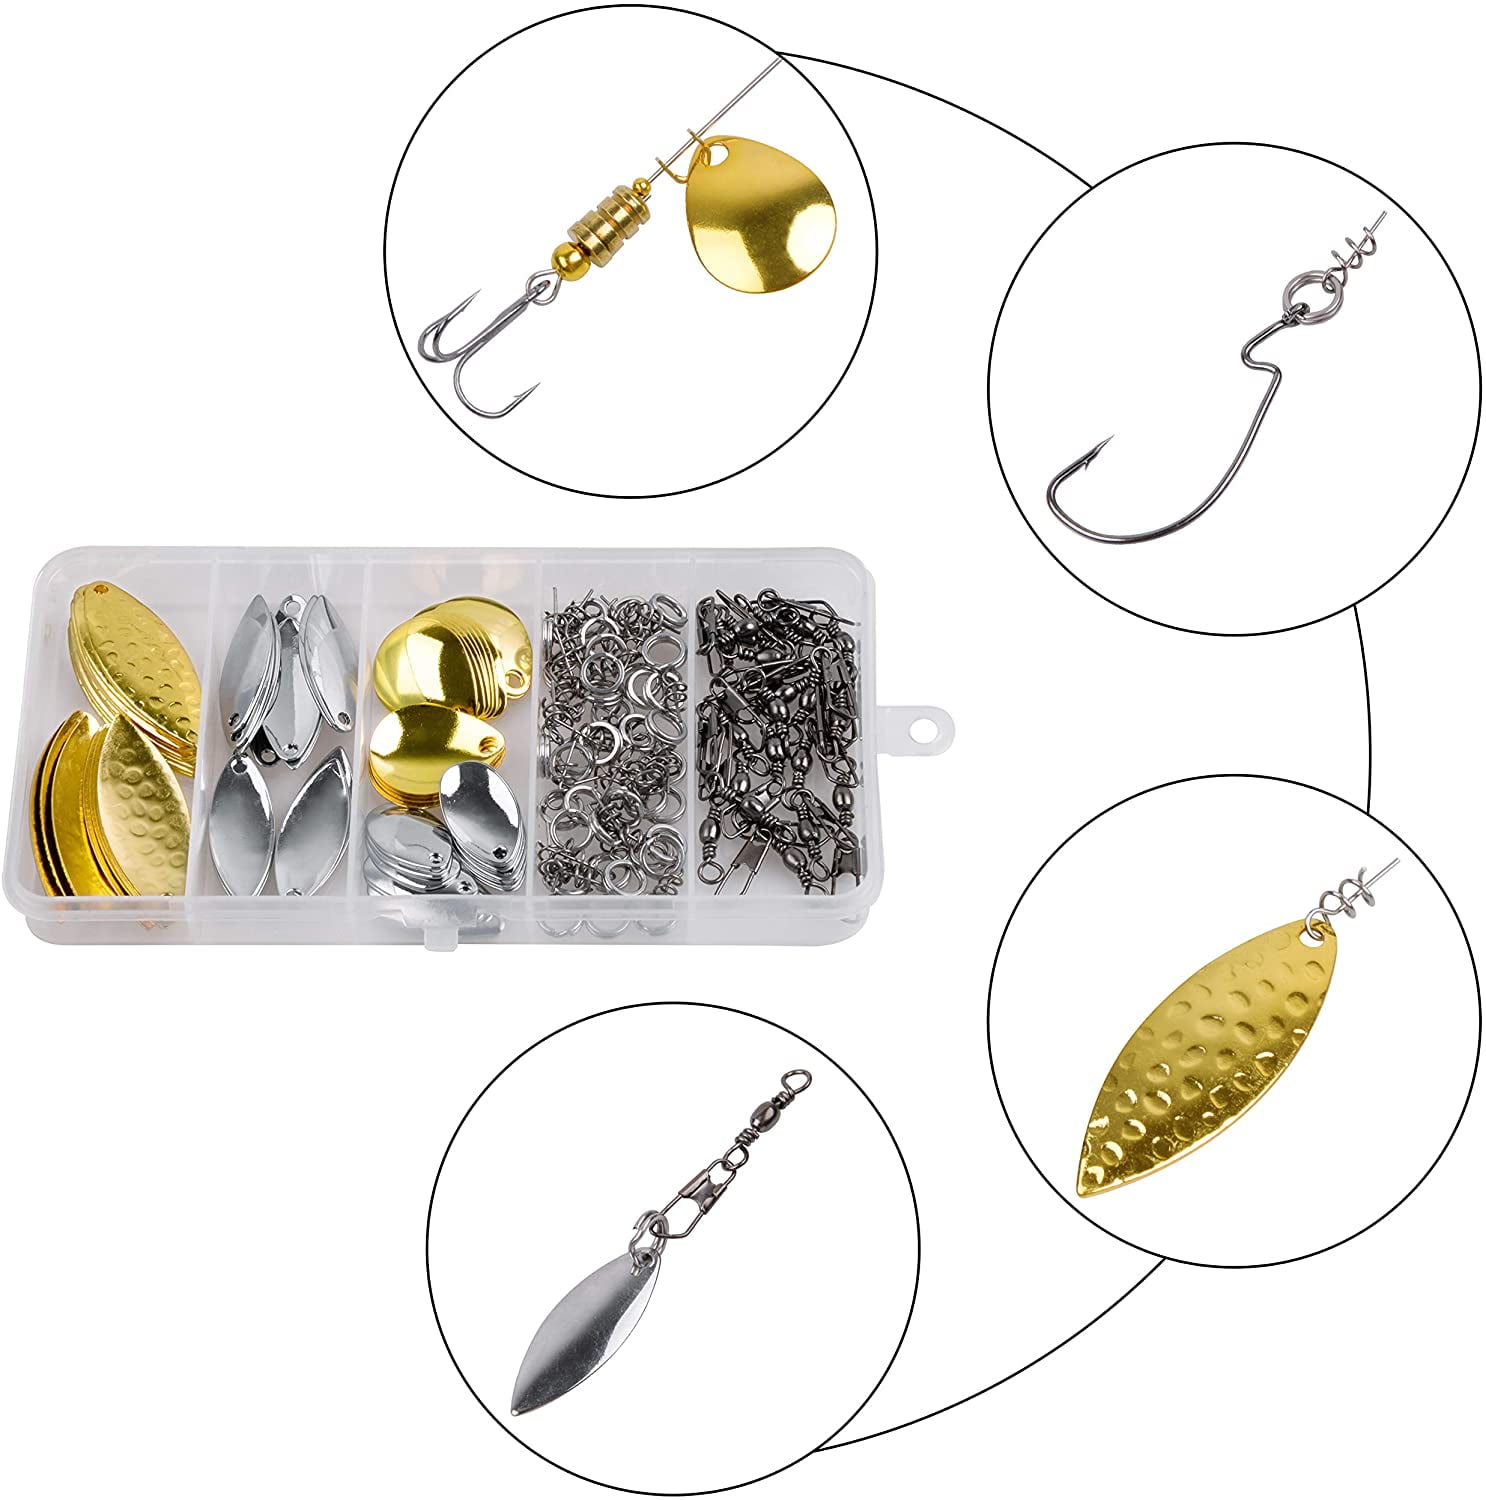 171Pcs Fishing Spoon Rigs DIY Lure Kit With Spinner Blade Bait